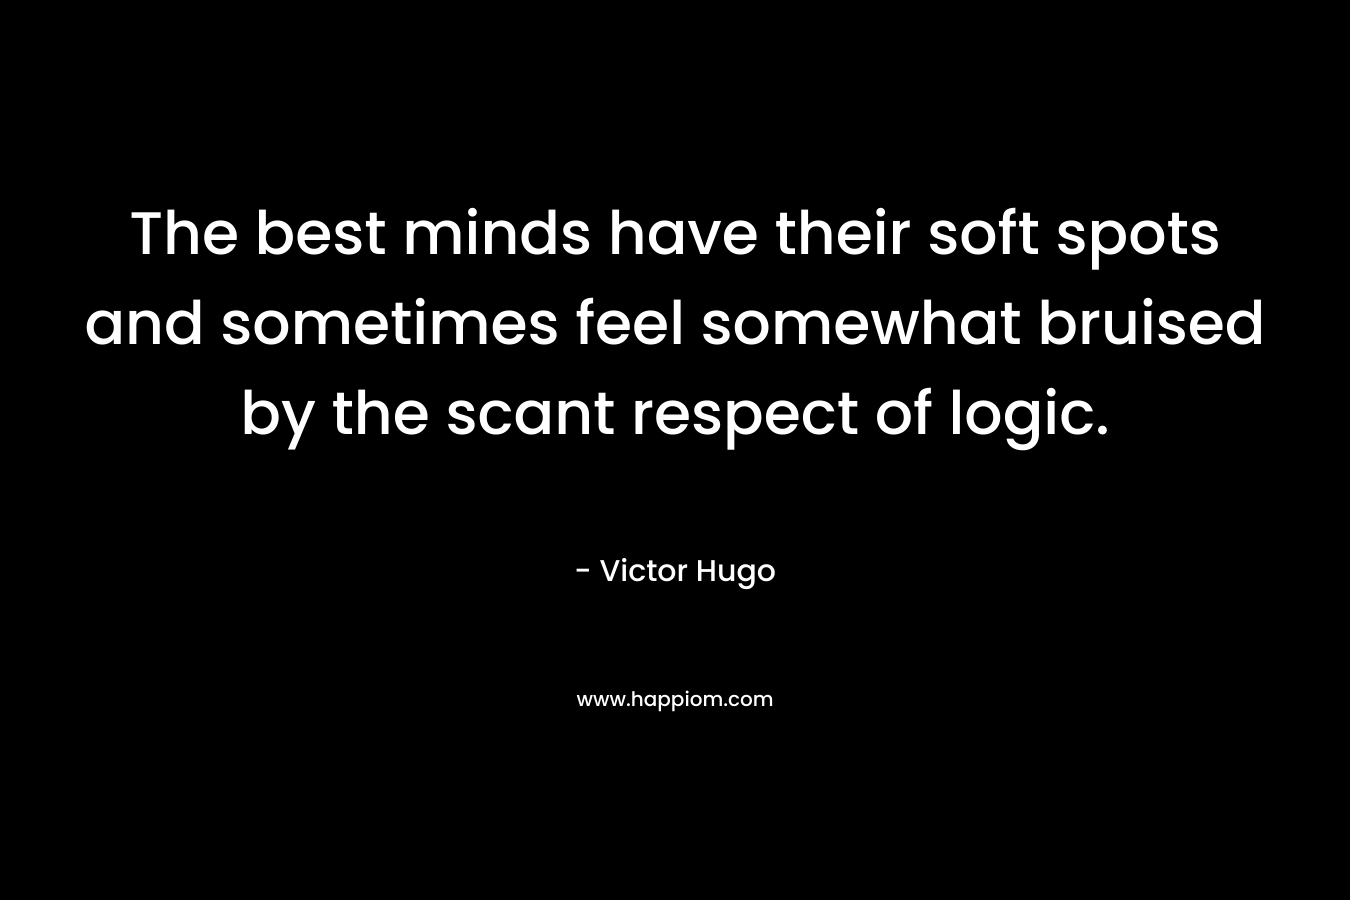 The best minds have their soft spots and sometimes feel somewhat bruised by the scant respect of logic.